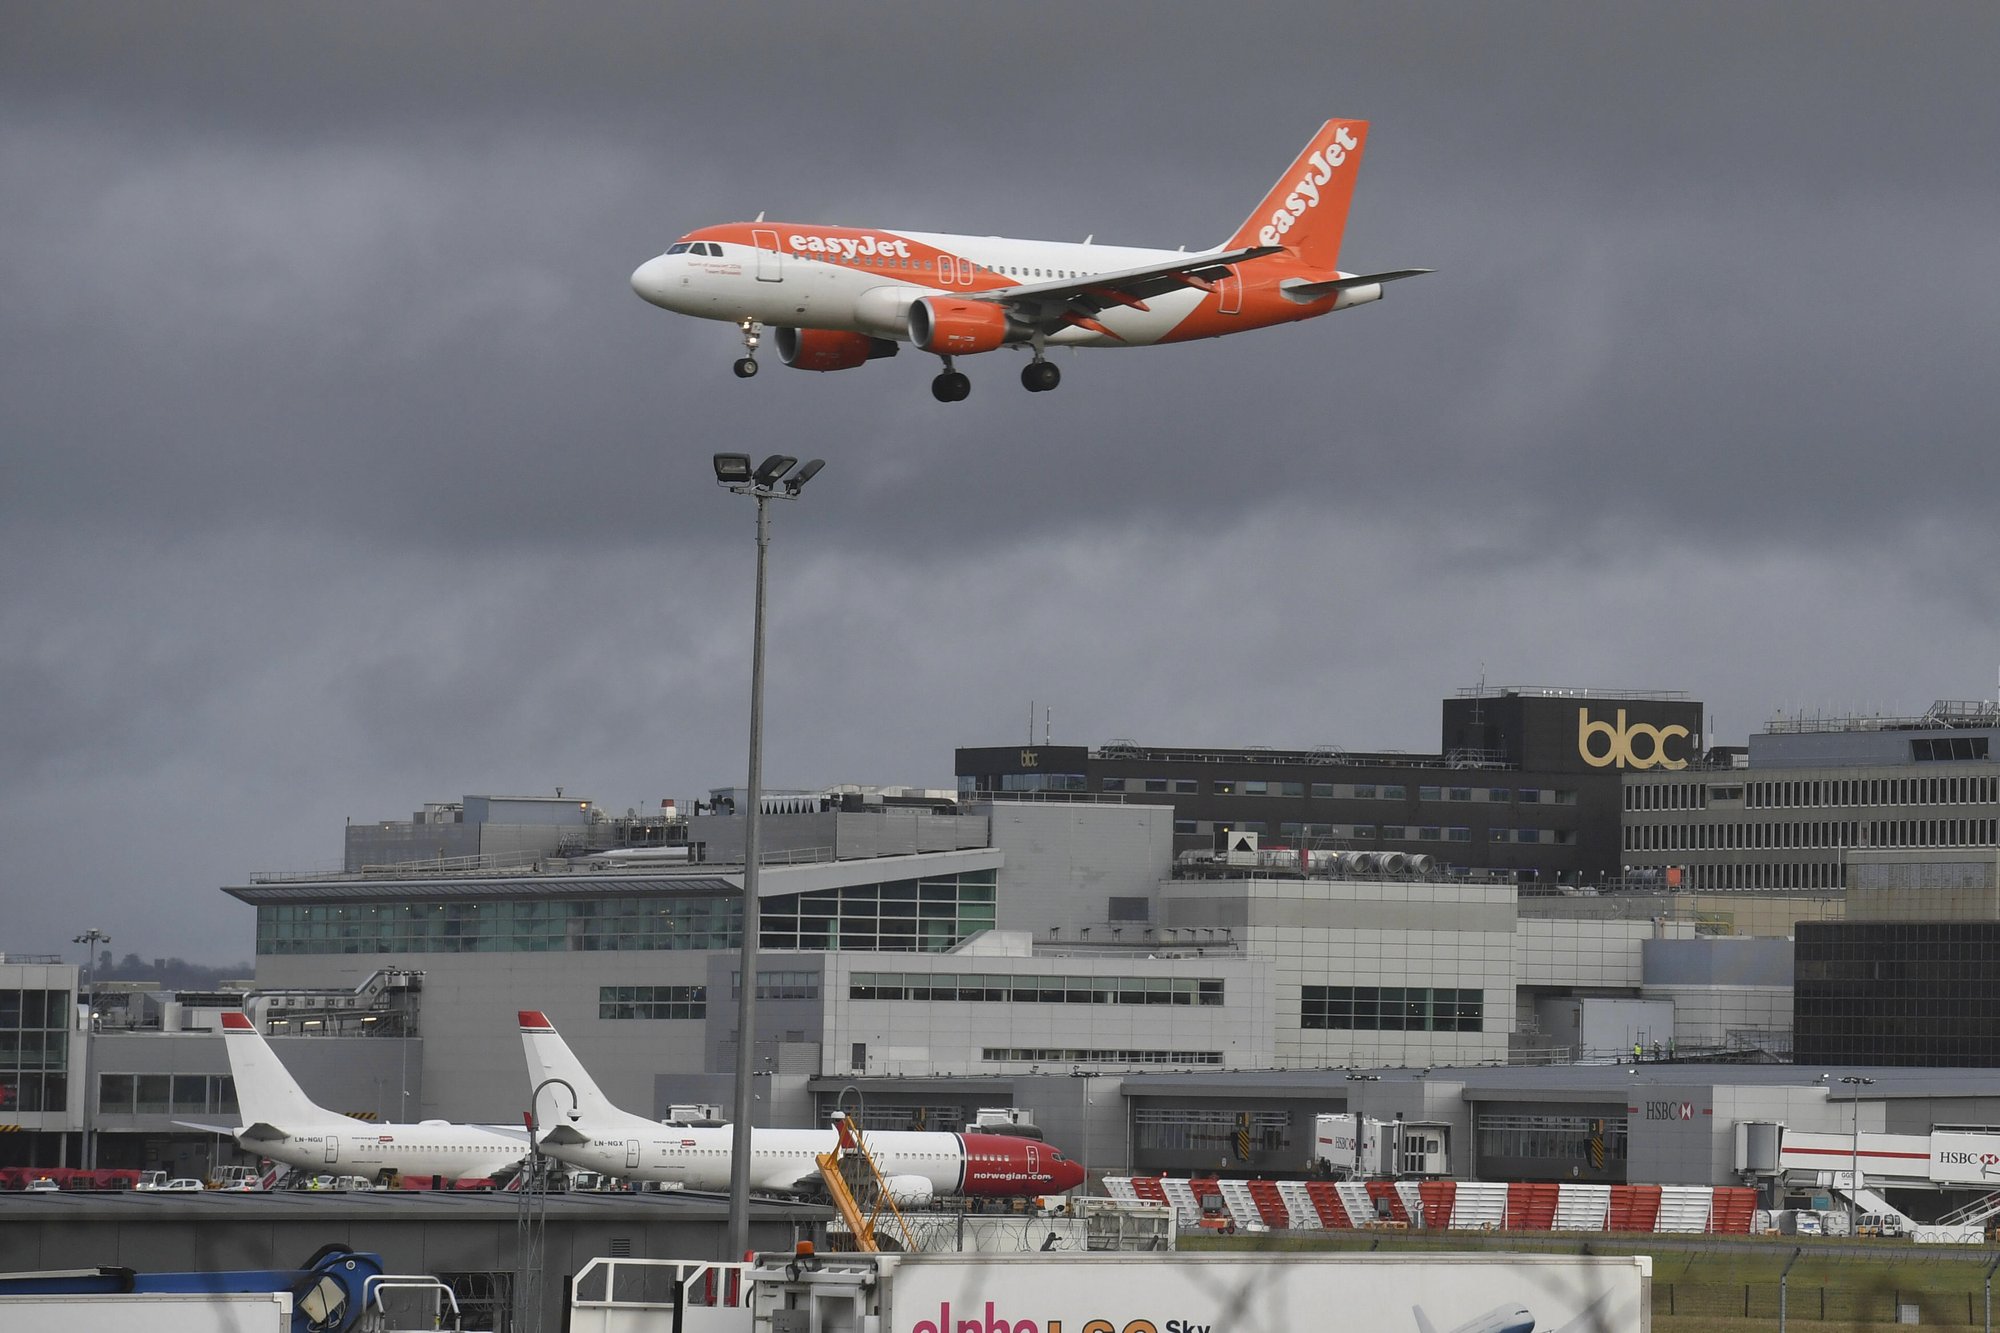 An EasyJet plane on its final approach before landing at Gatwick airport near London, on Friday Dec. 21, 2018. Photo: AP